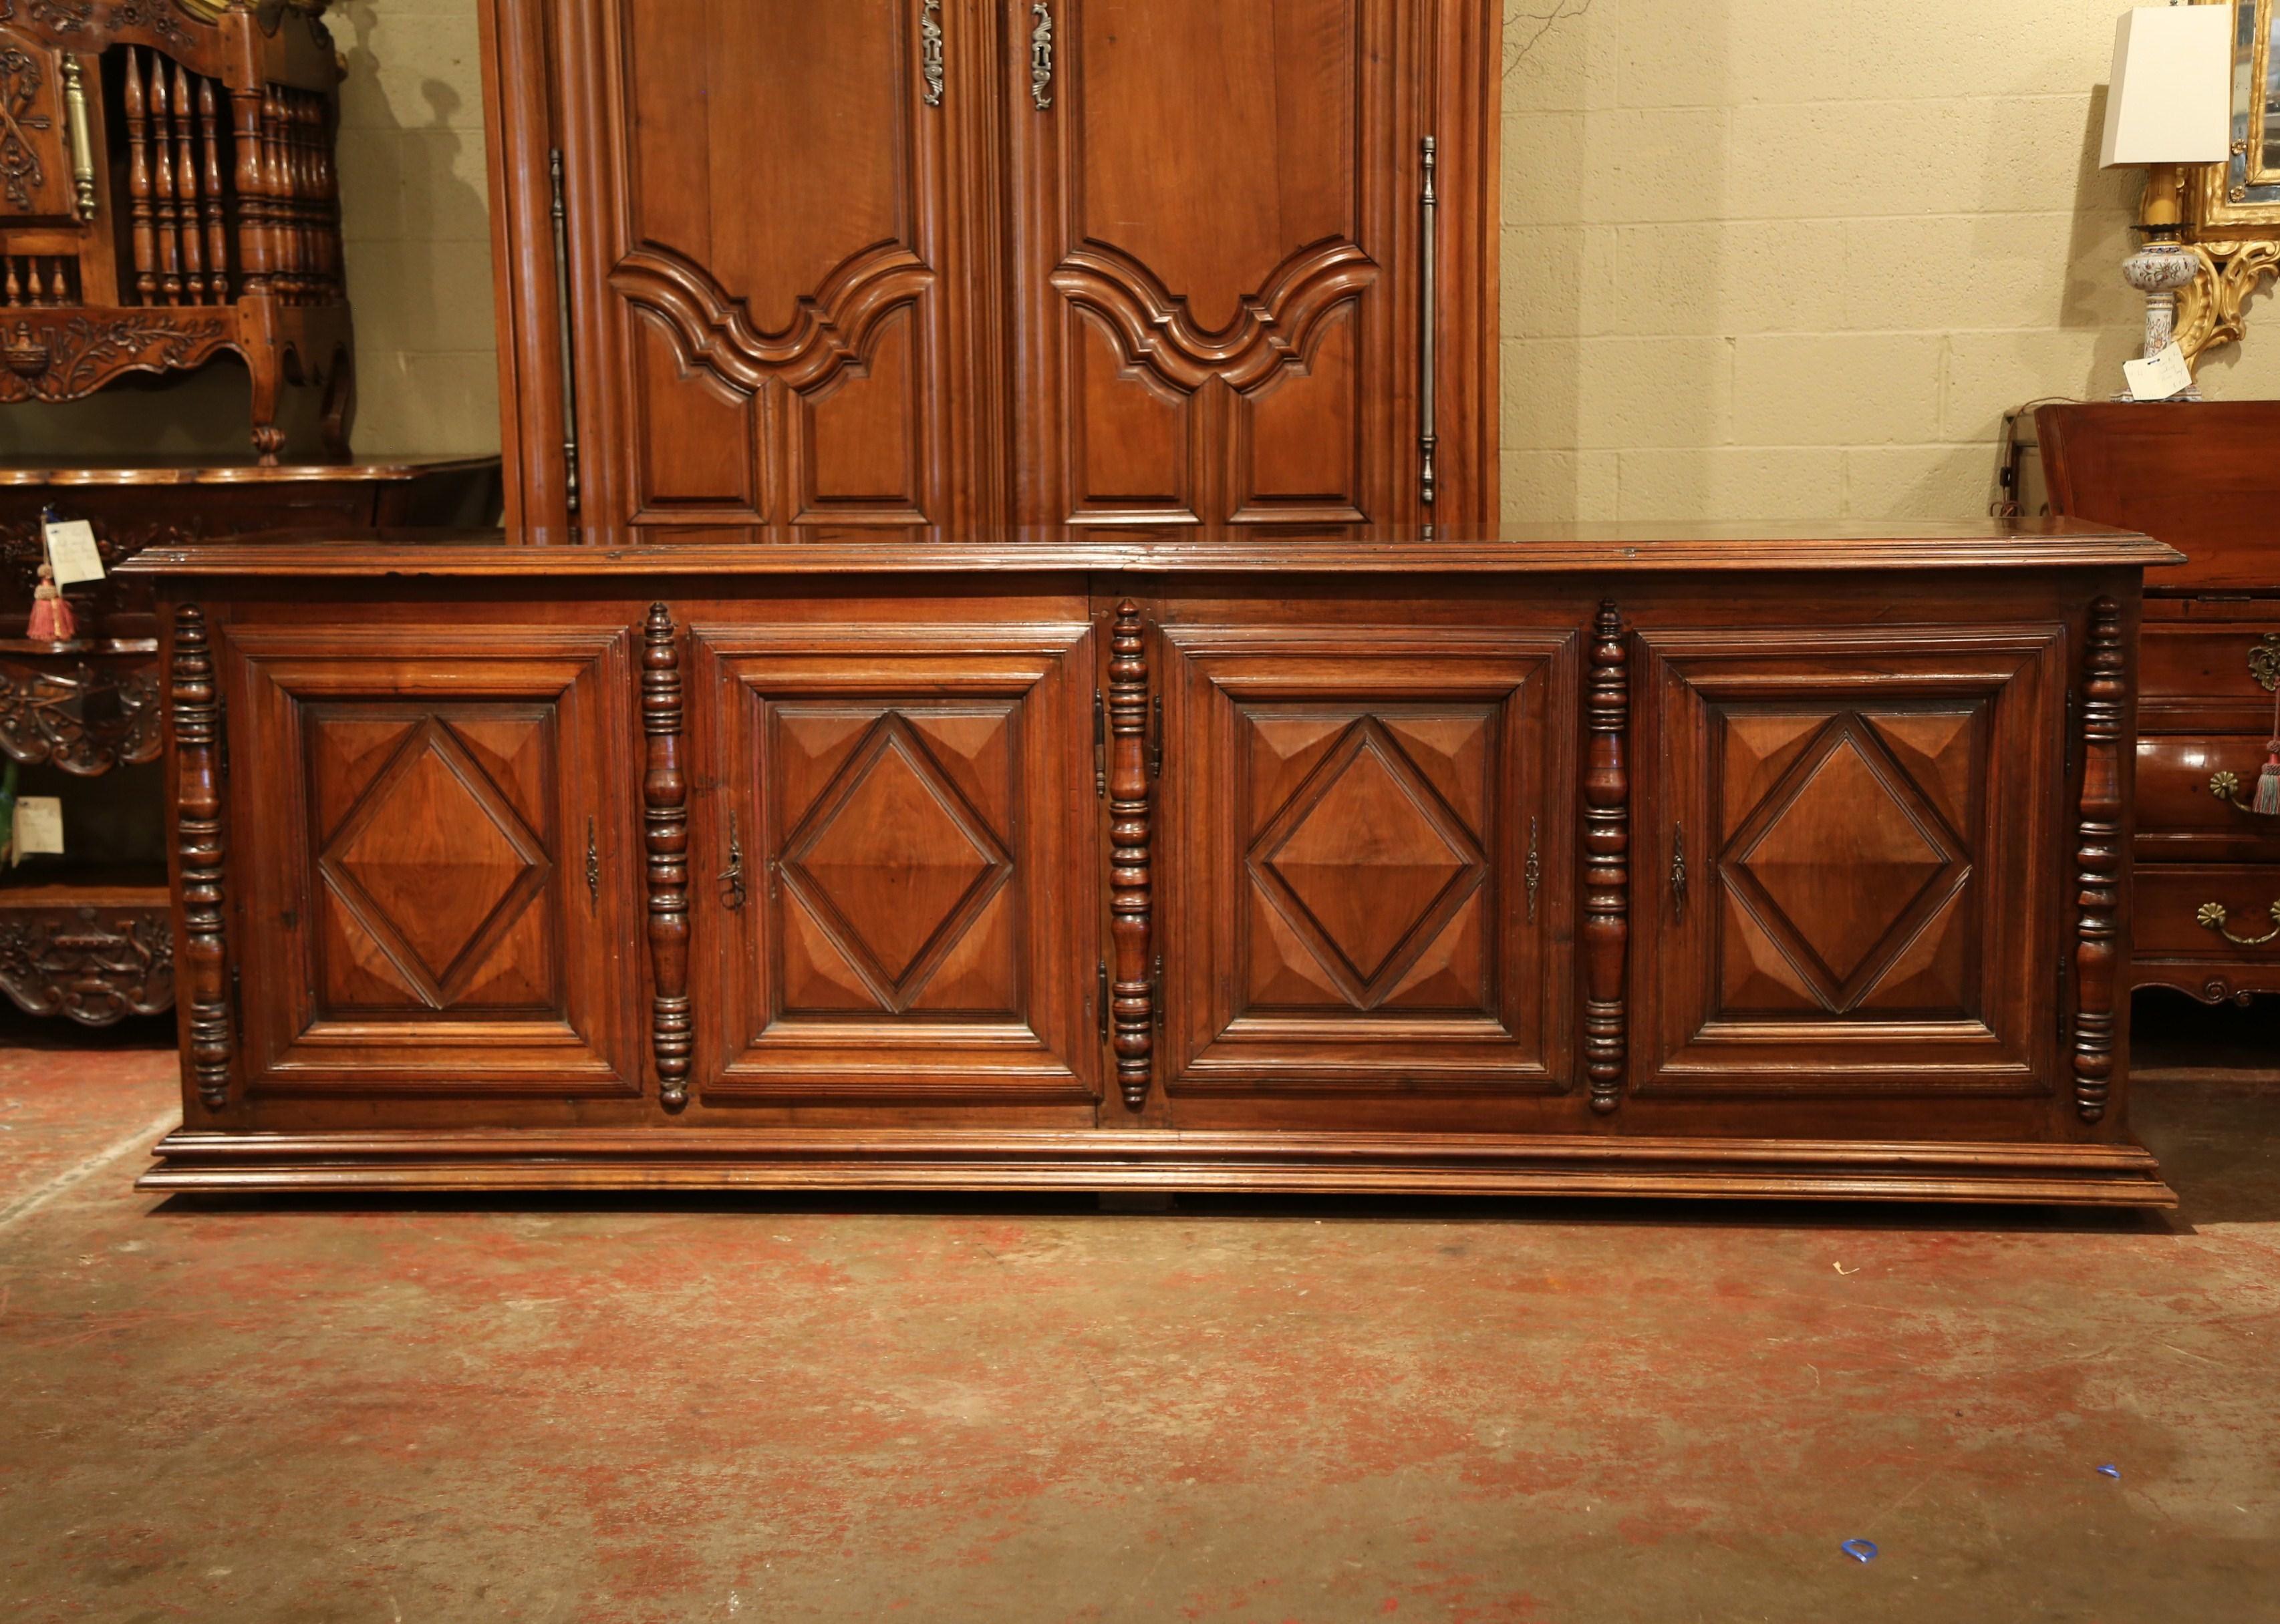 Place this long, antique fruitwood buffet in your dining room to function as a convenient serving and storage piece. Carved in the south of France, circa 1820, this large, impressive enfilade features four carved doors with simple, geometric diamond